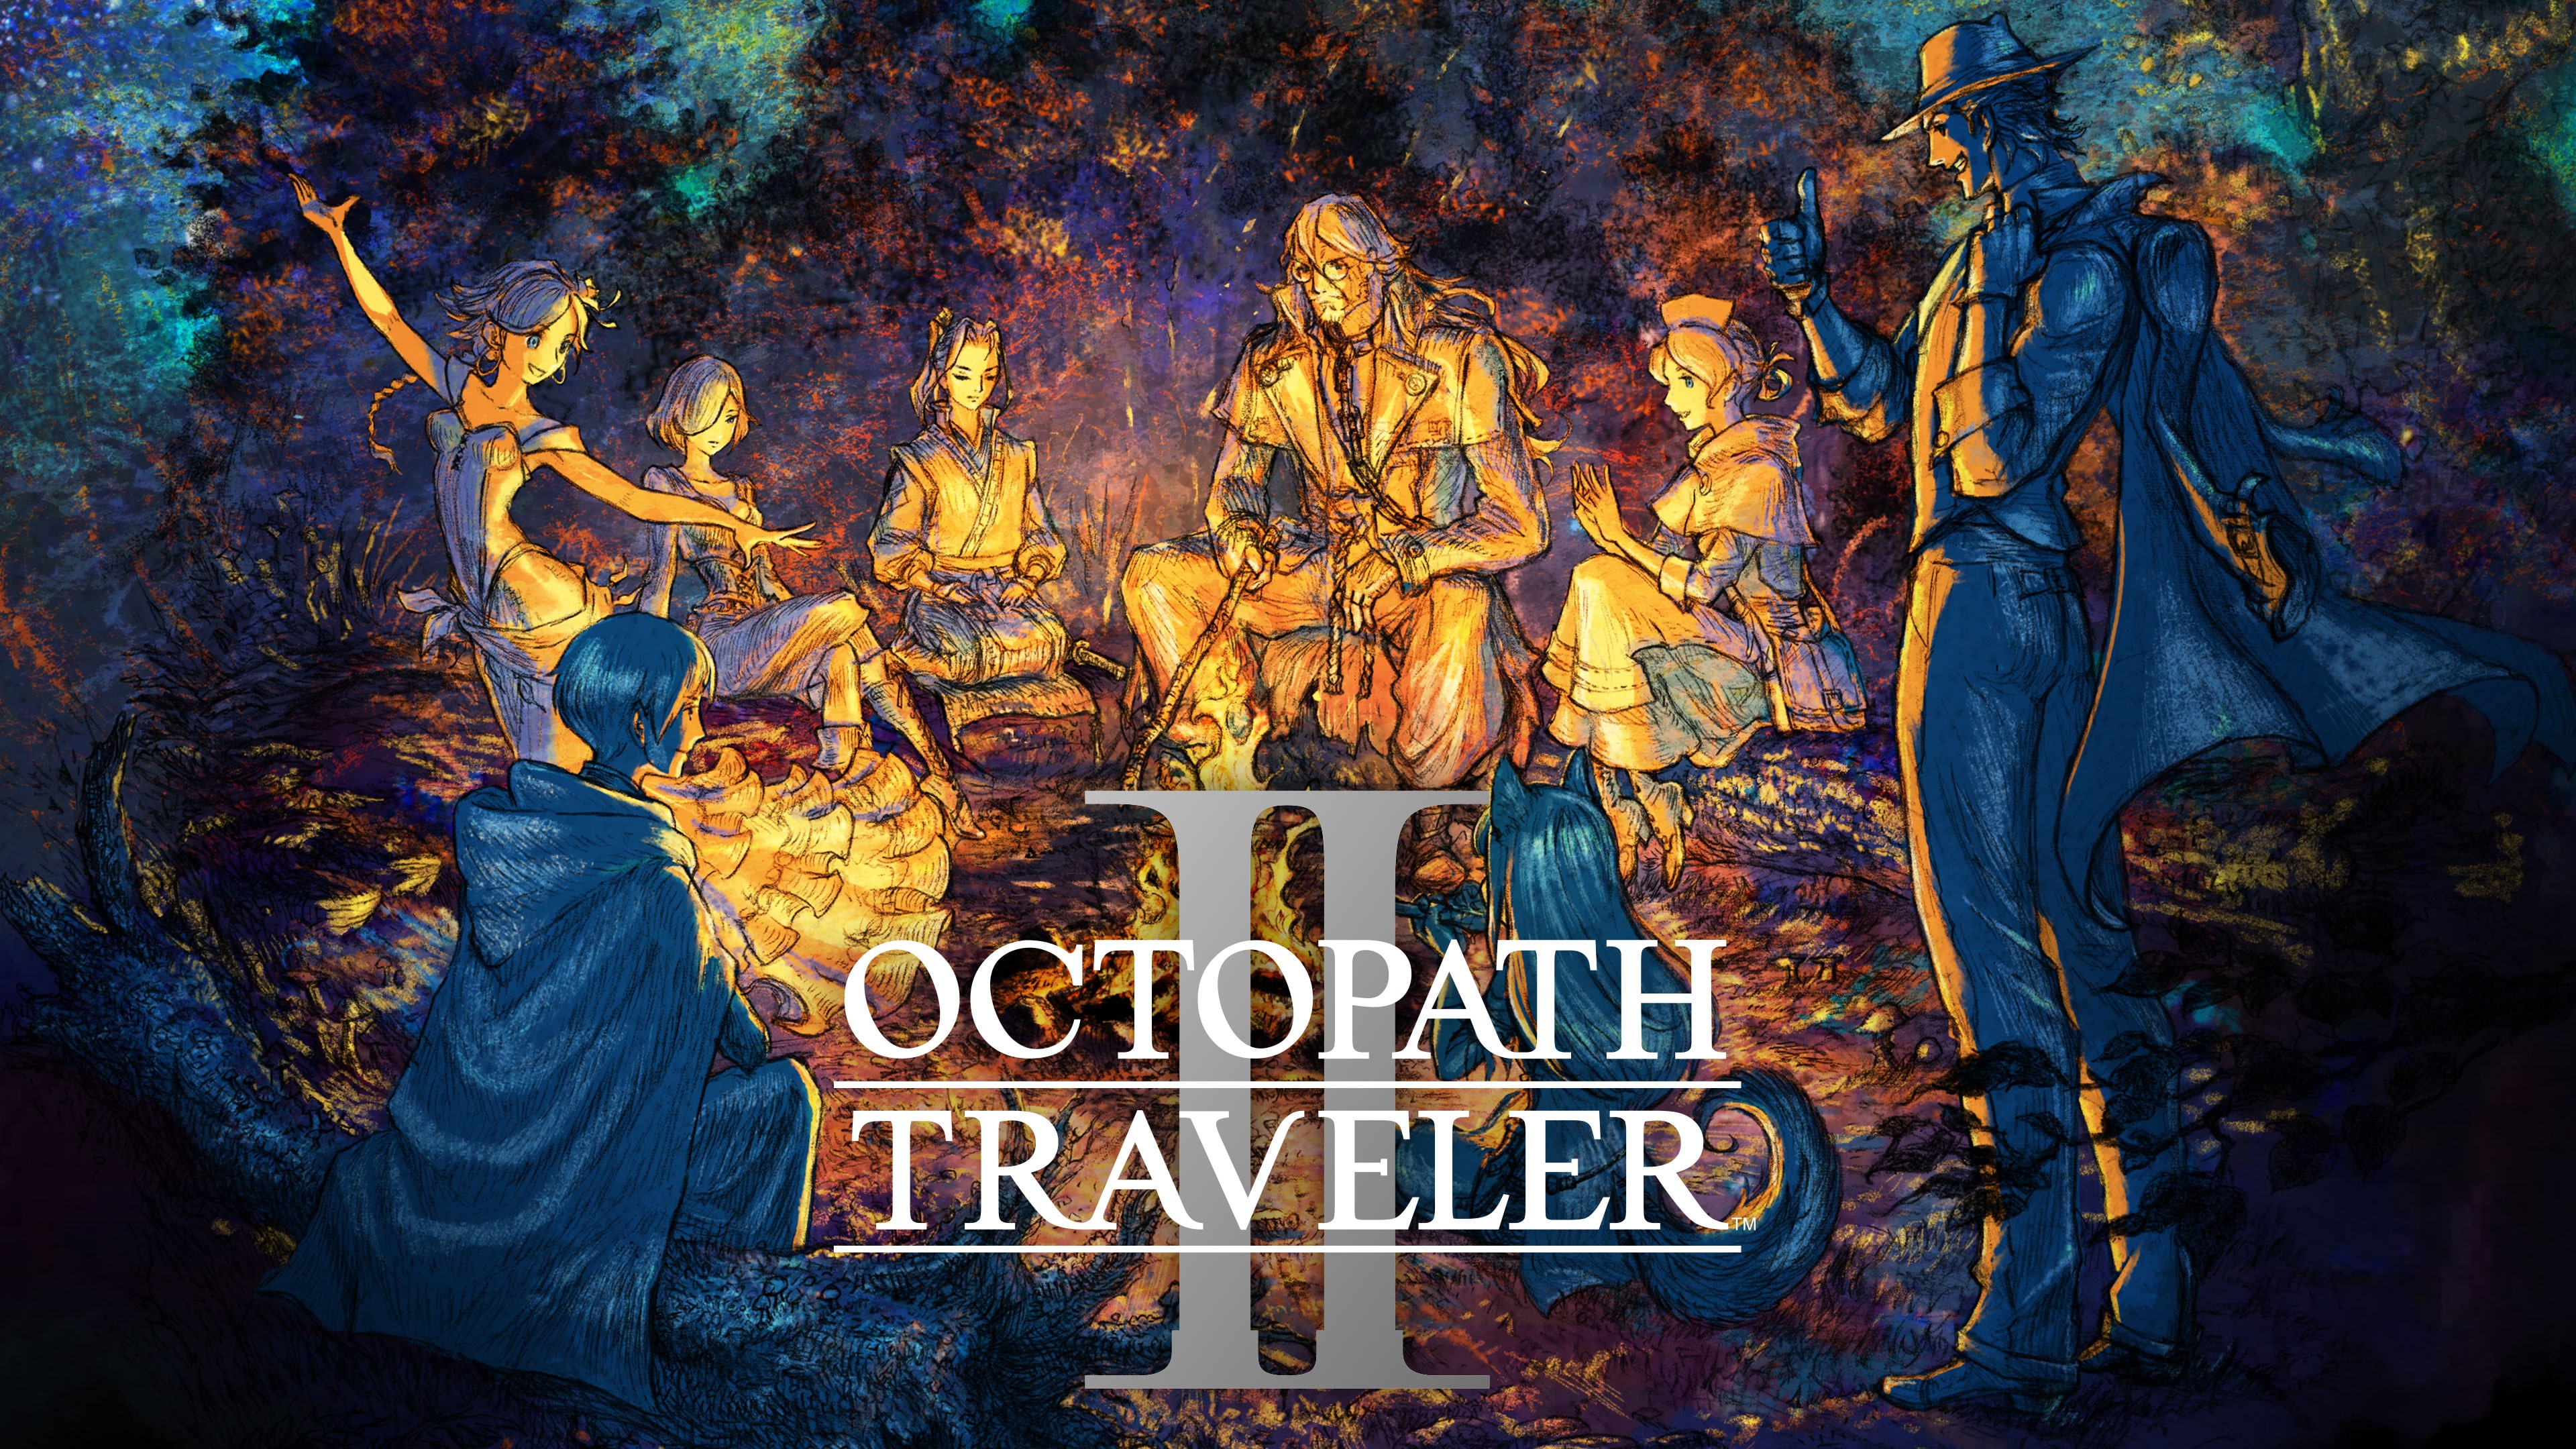 OCTOPATH TRAVELER II PS4＆PS5 (Simplified Chinese, English, Korean, Japanese, Traditional Chinese)